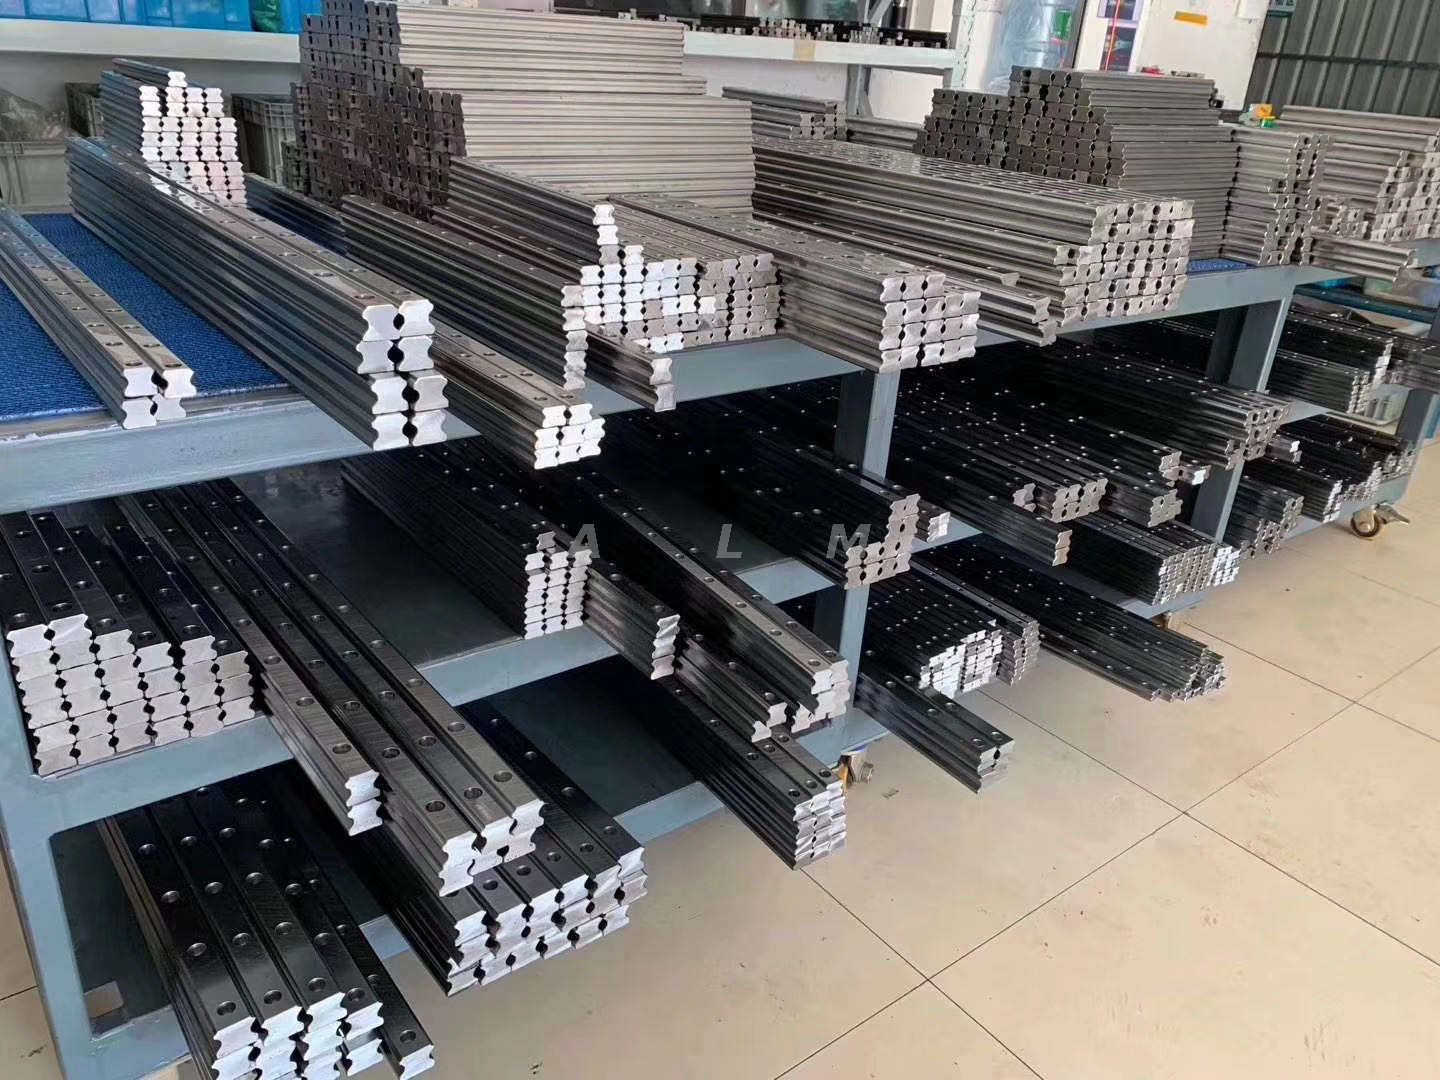 EGH15CA Linear Block And Linear Guide for Dispensing Equipment